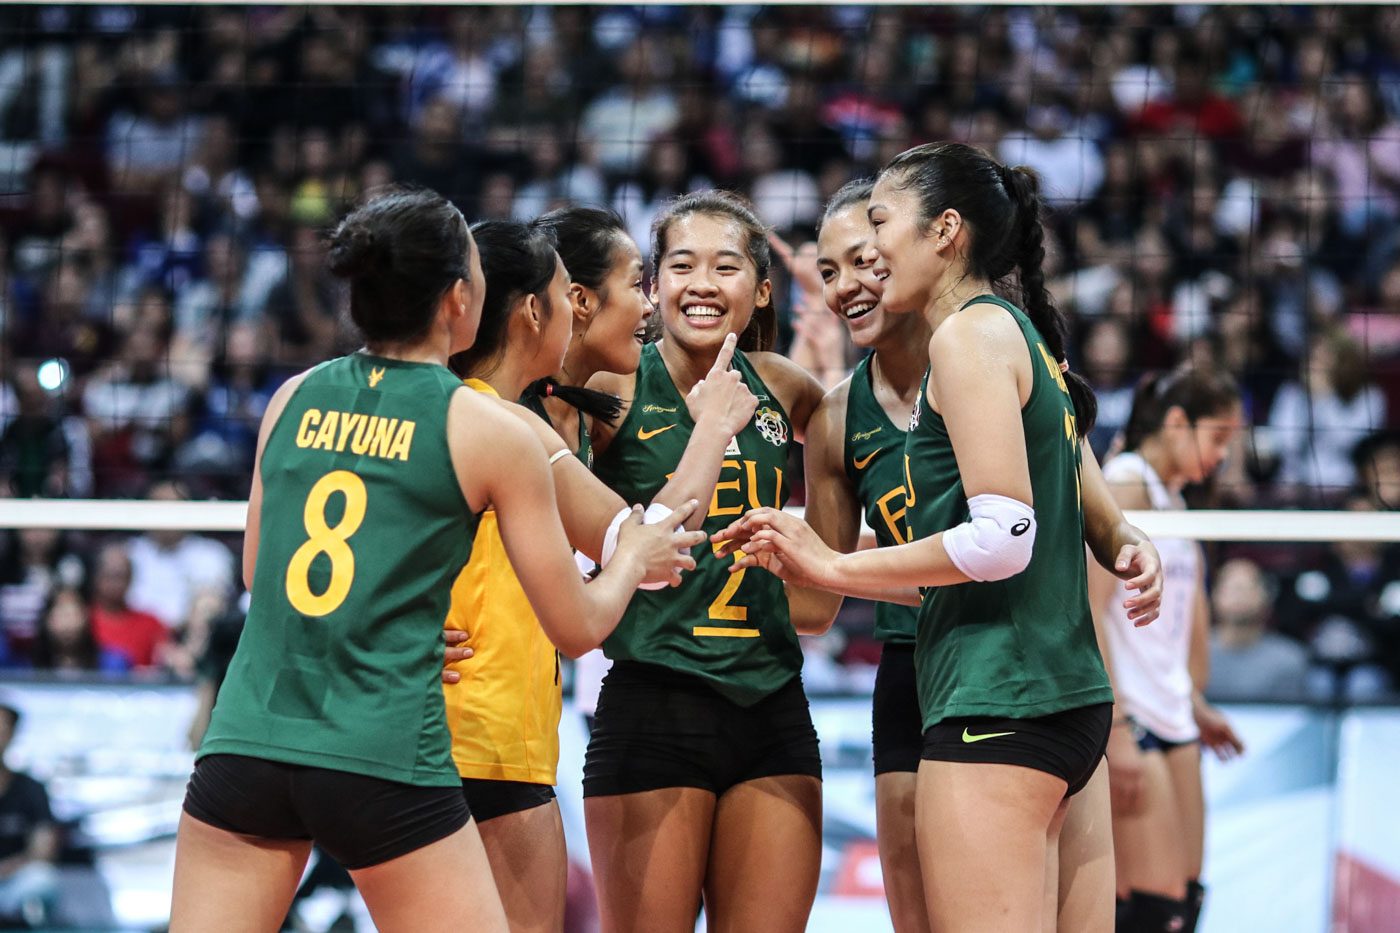 Pons won’t let go of Finals dream in her last playing year